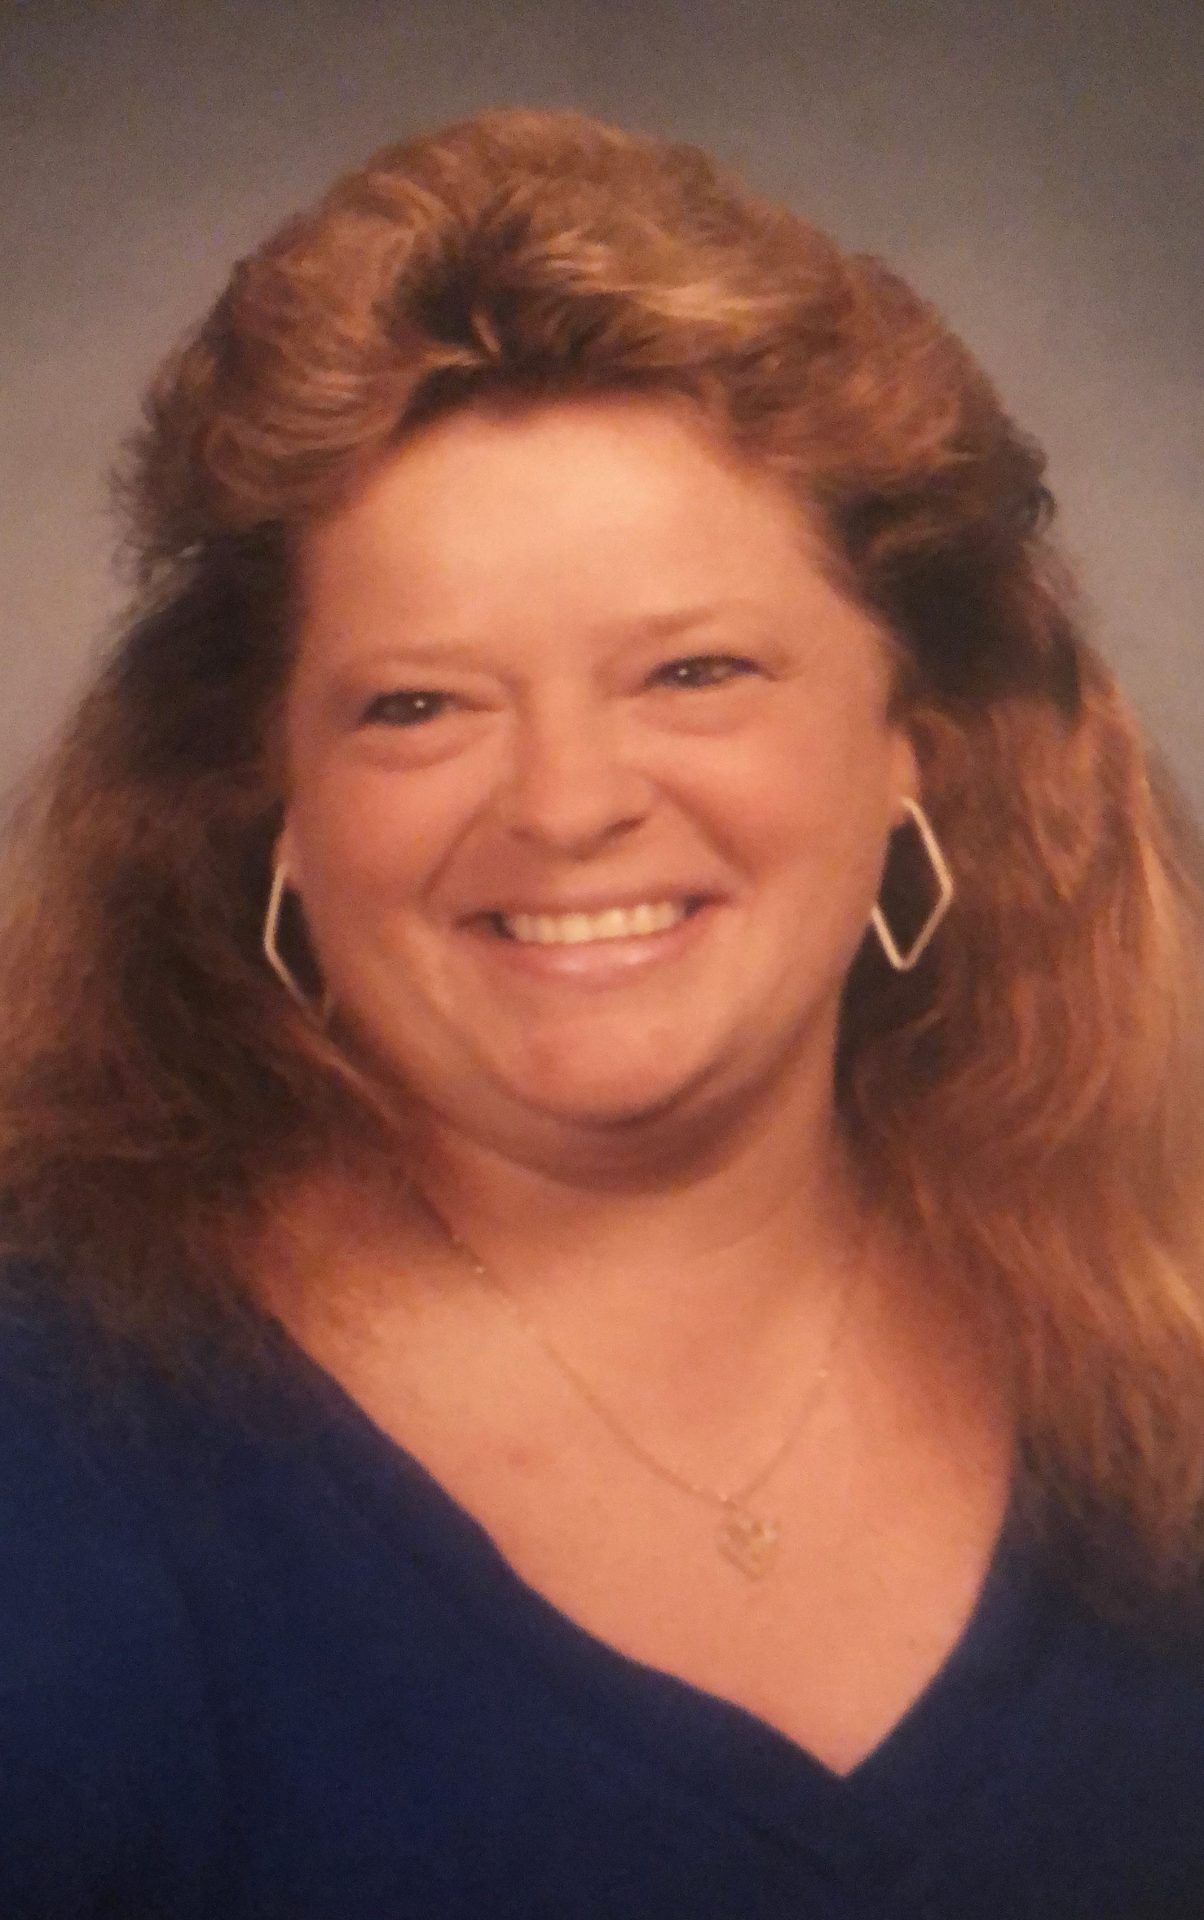 Denise A. Markell Griffin - Passed away on July 24, 2020